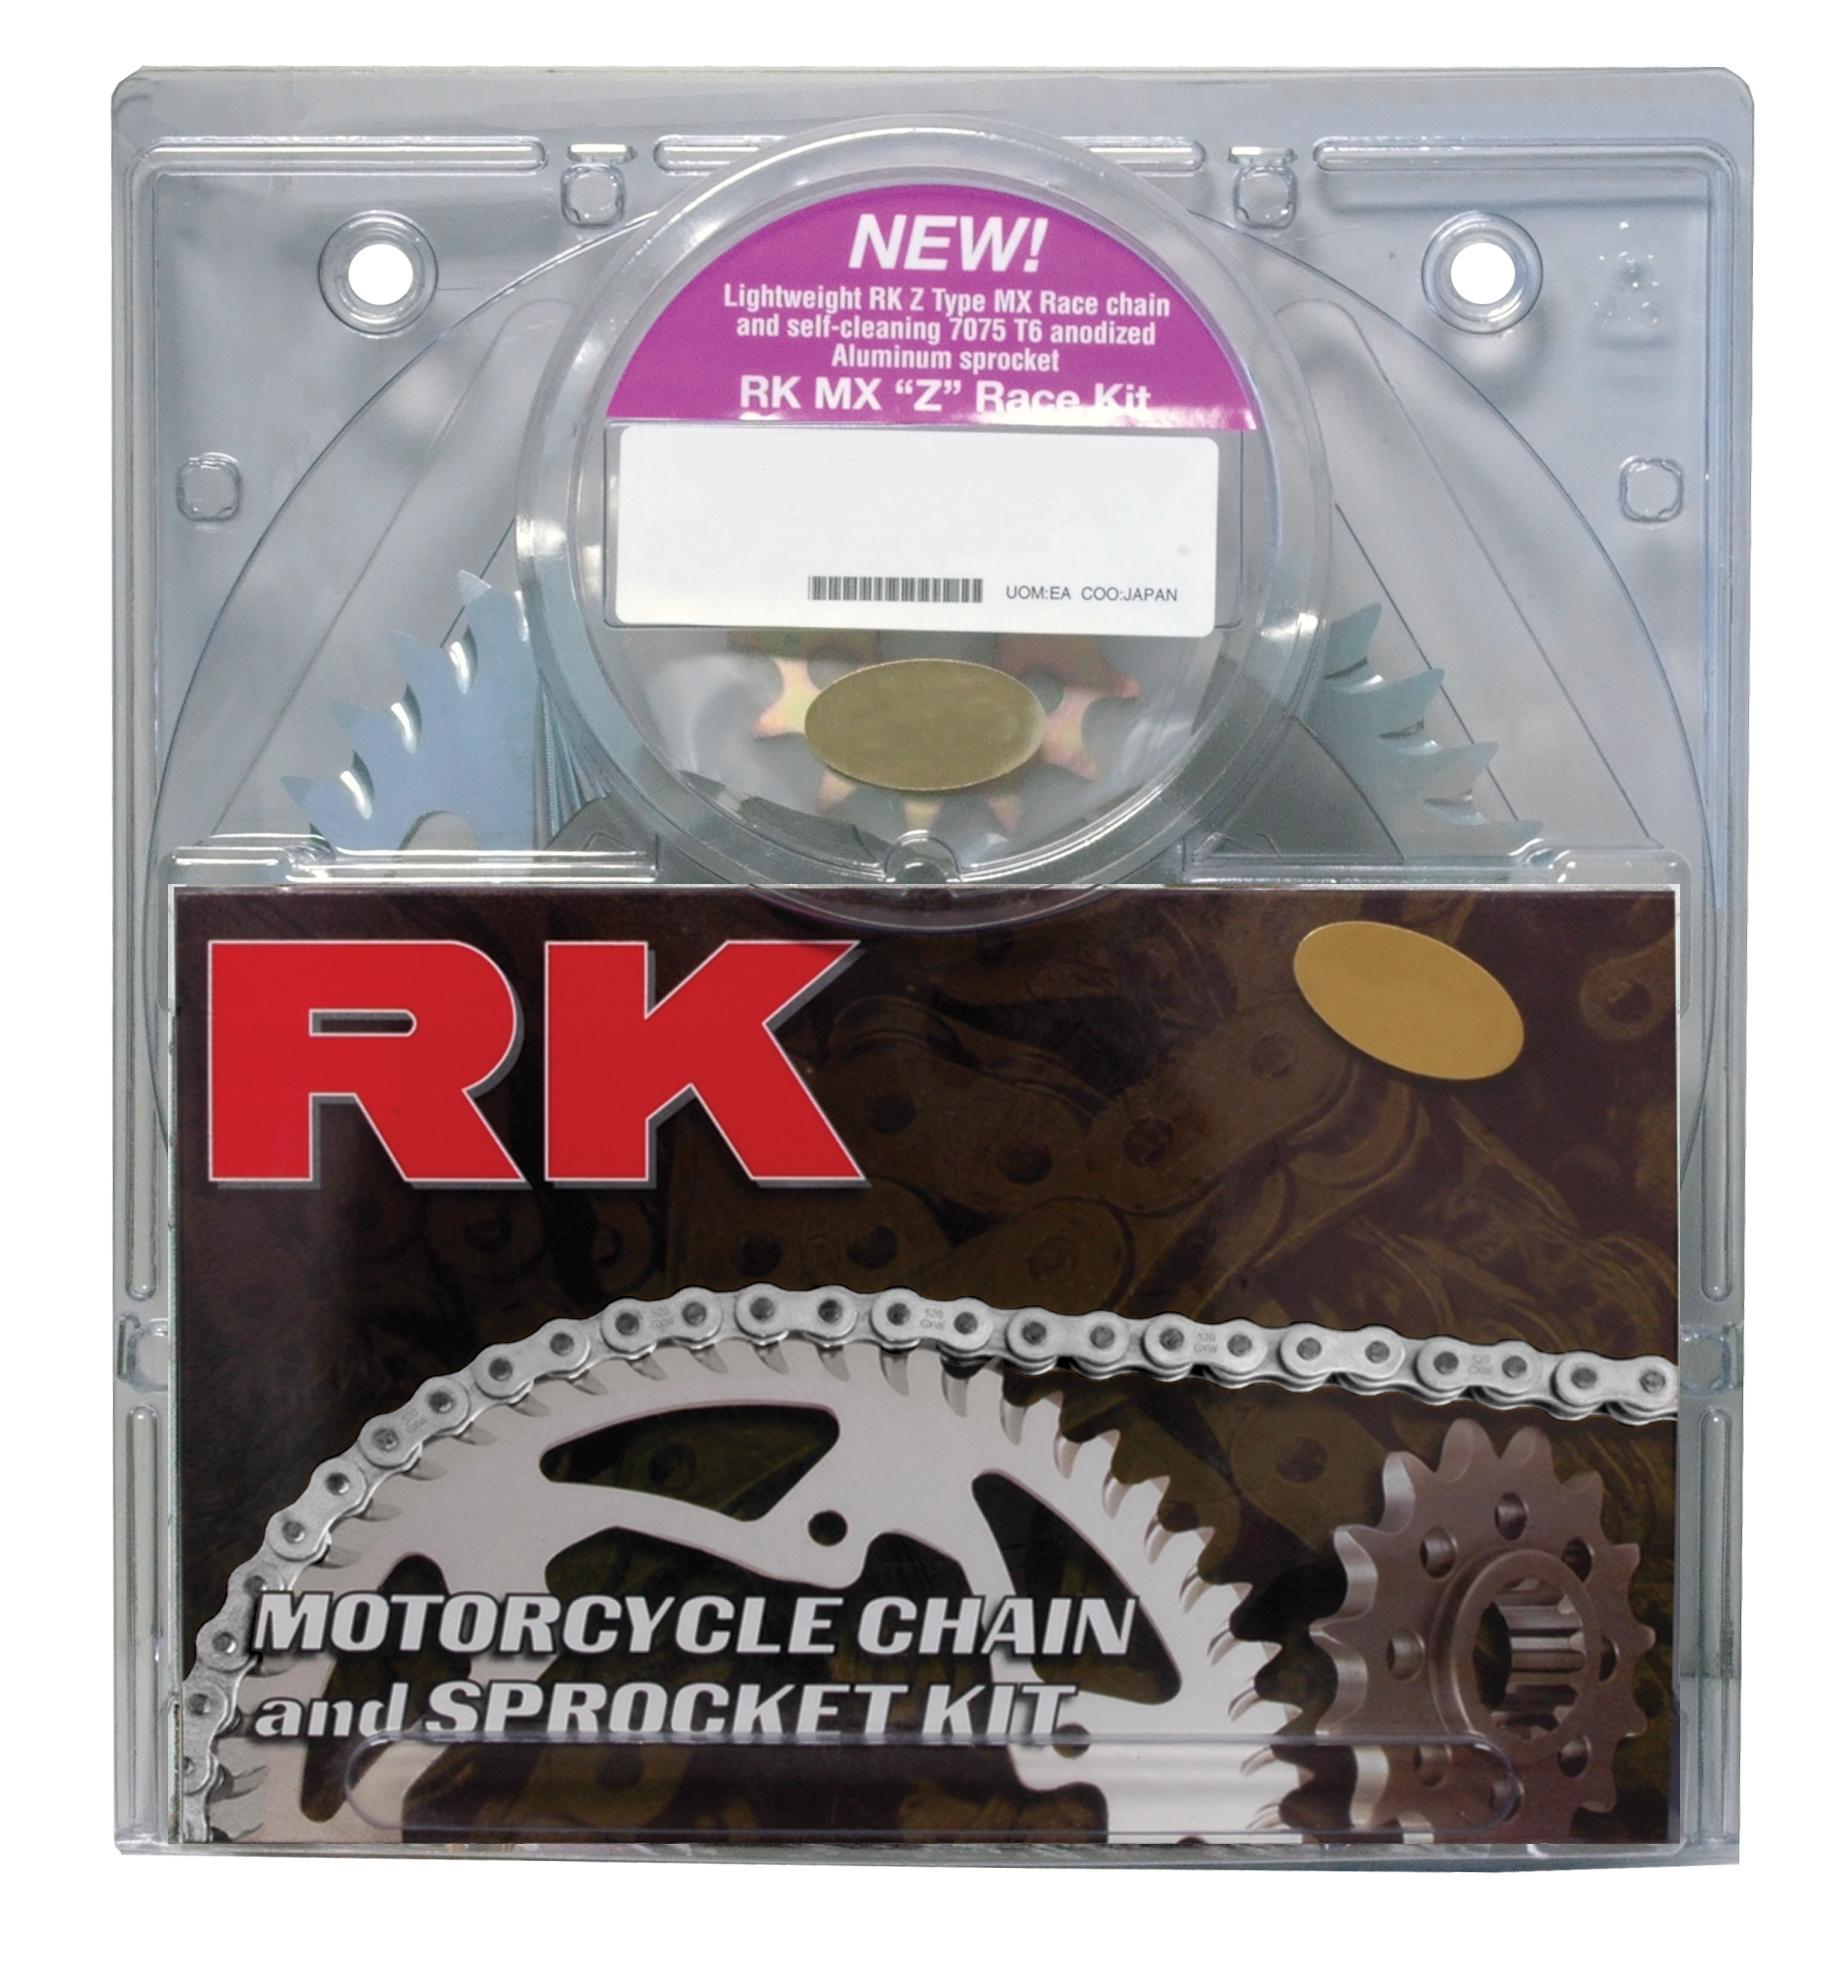 520MXZ4-114 Chain 13/50 Silver Aluminum Sprocket Kit - RK Excel Chain & Sprocket Kit - Click Image to Close